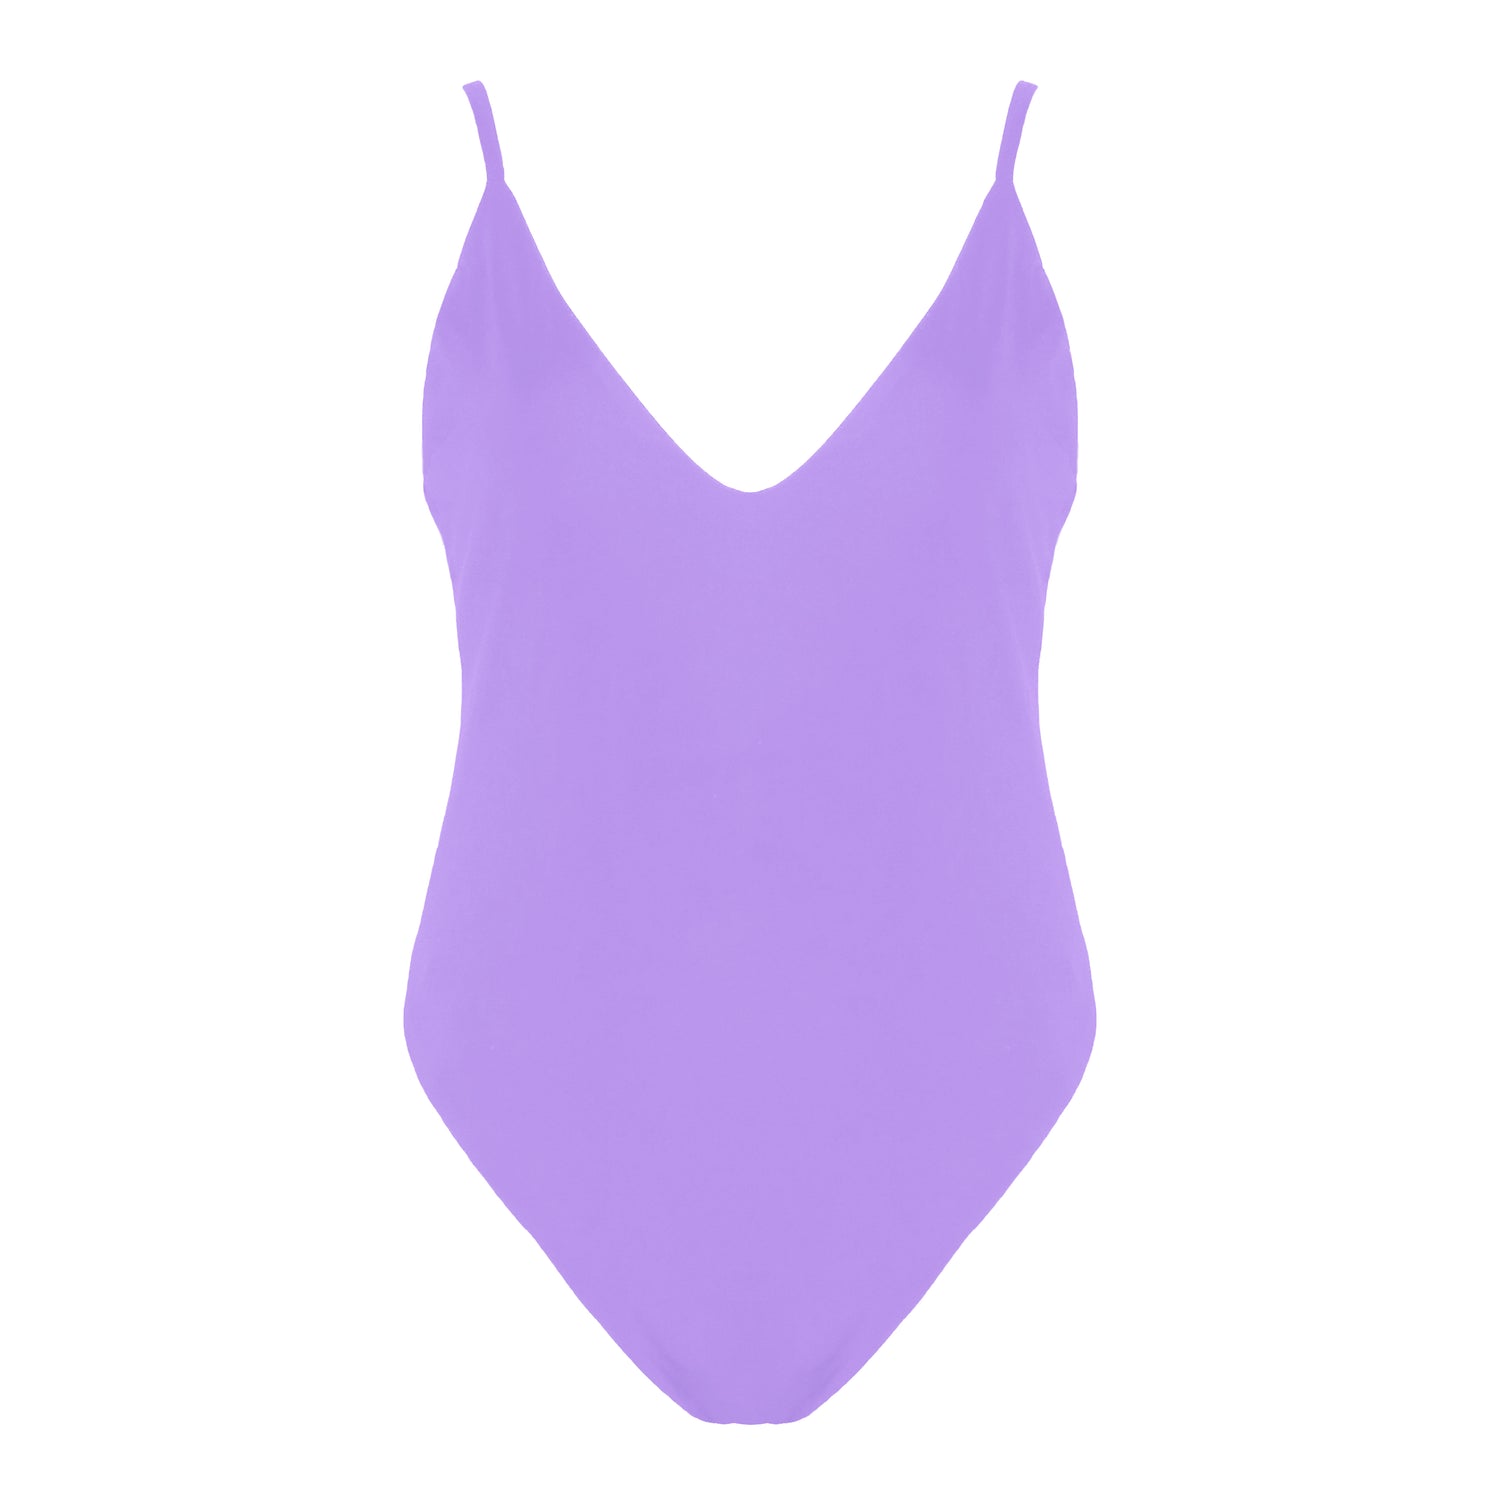 Lavender simplistic plunging v-neck one piece swimsuit with a low v-back, high cut legs and full coverage.